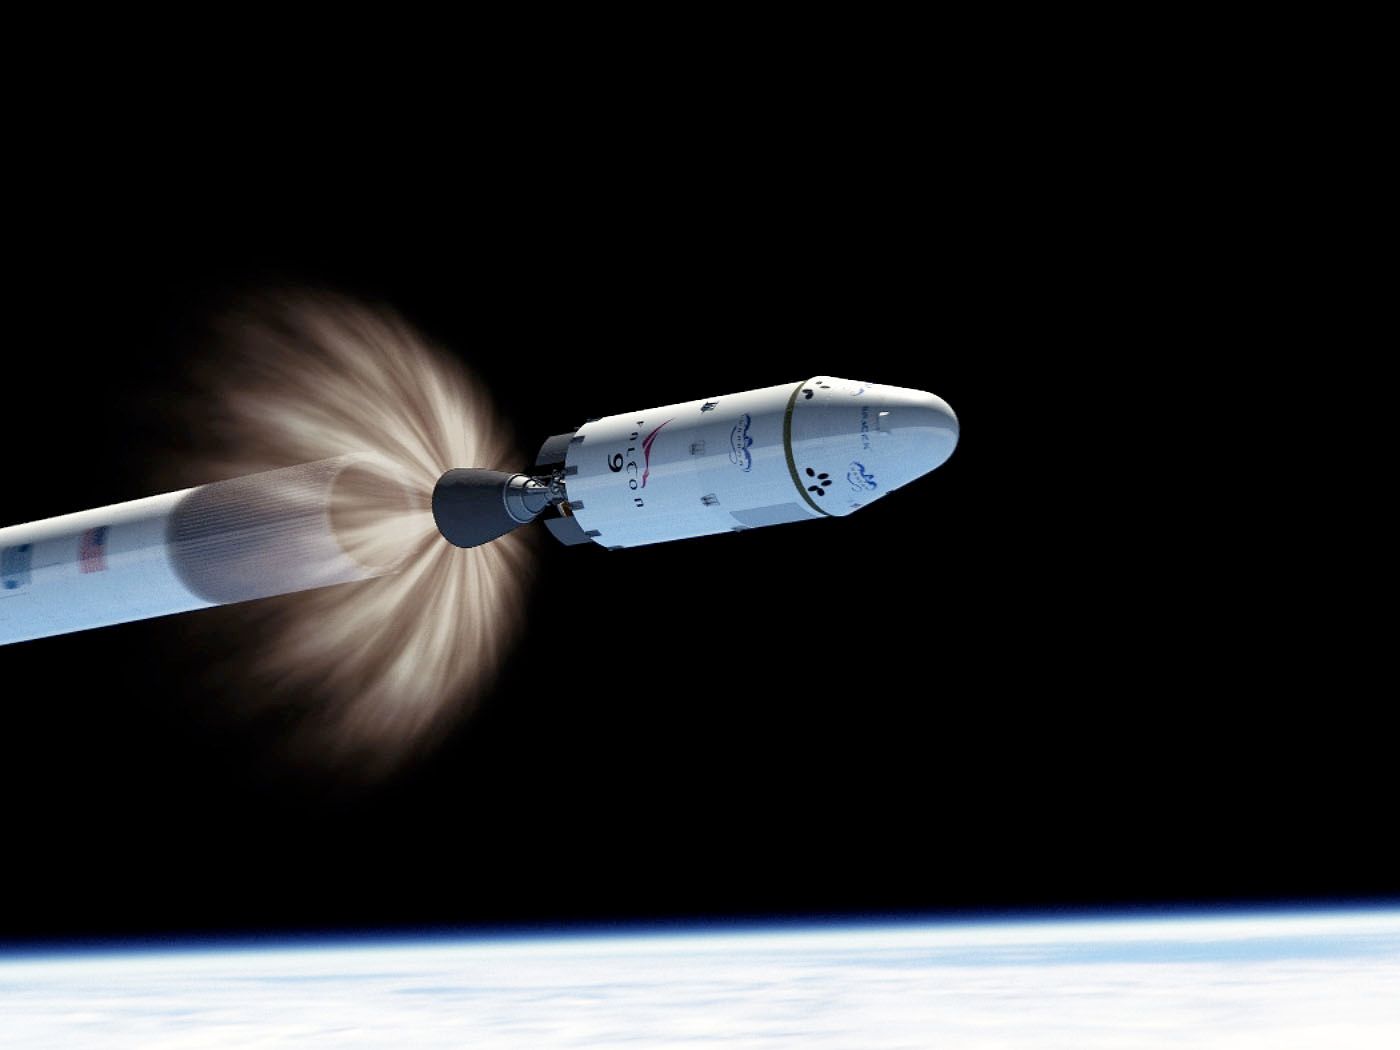 An artist's depiction of the SpaceX Falcon 9's second stage separating from the first stage in space.